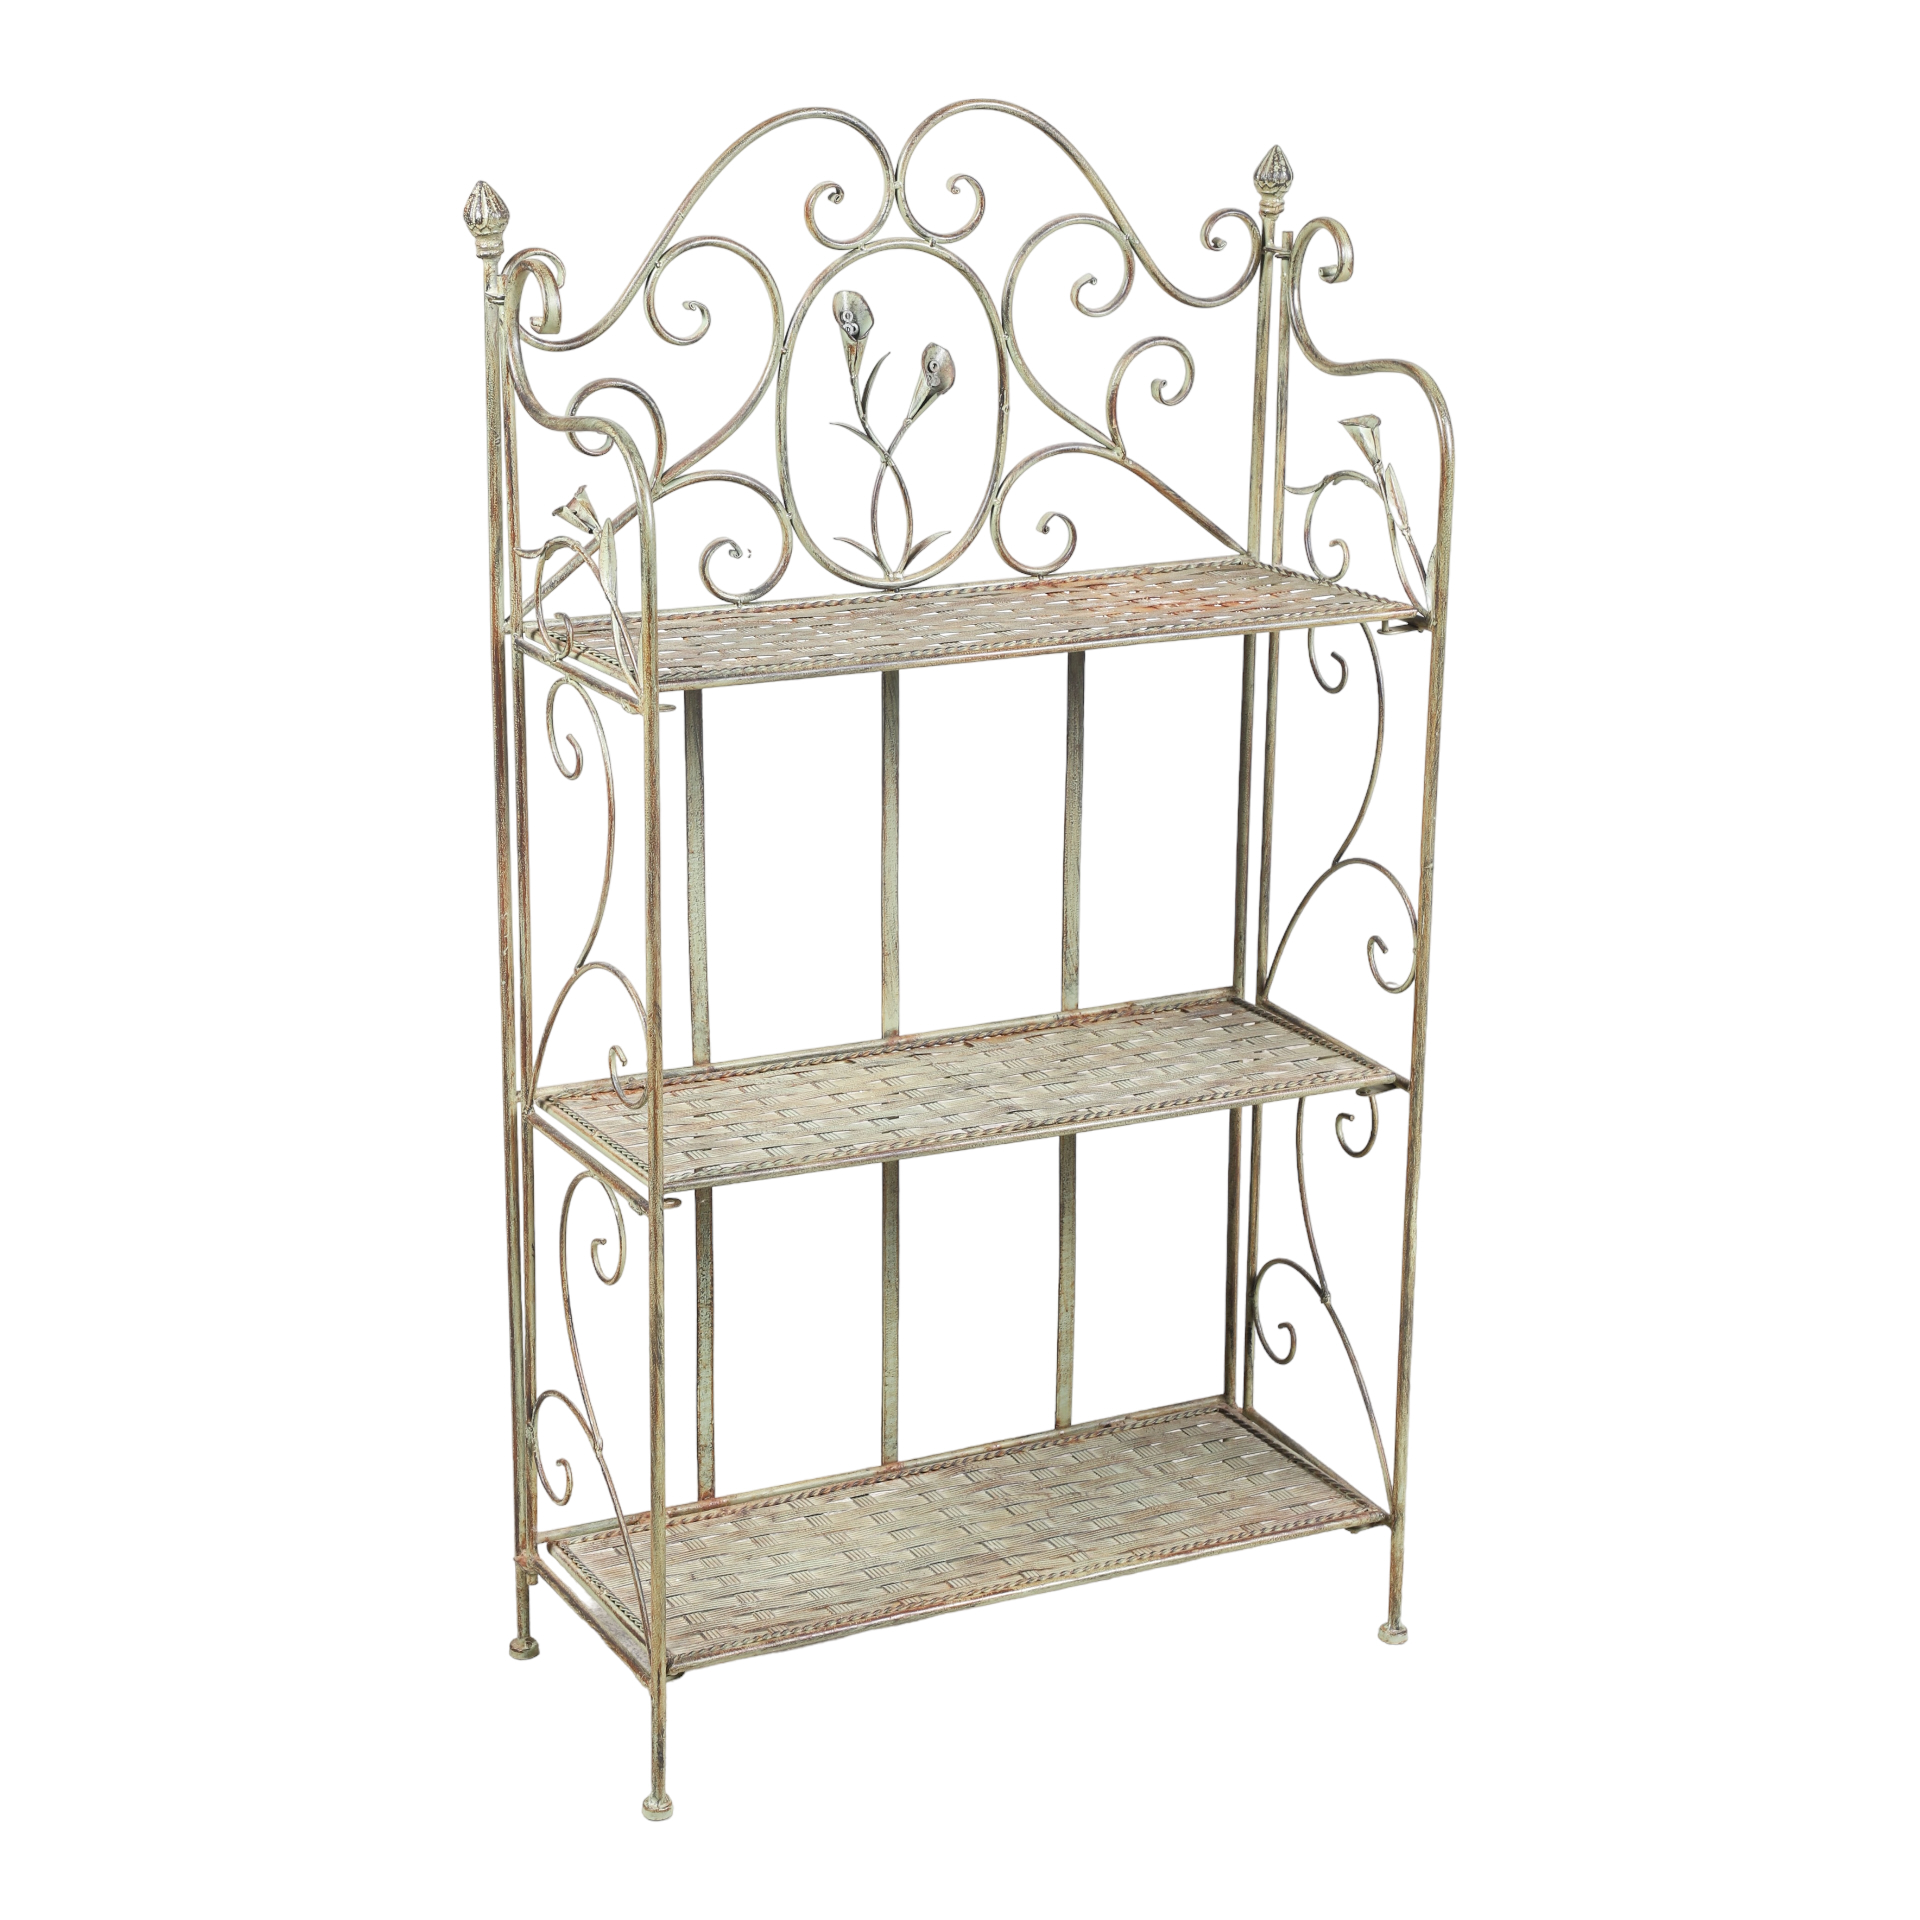 Contemporary scrolled metal rack,